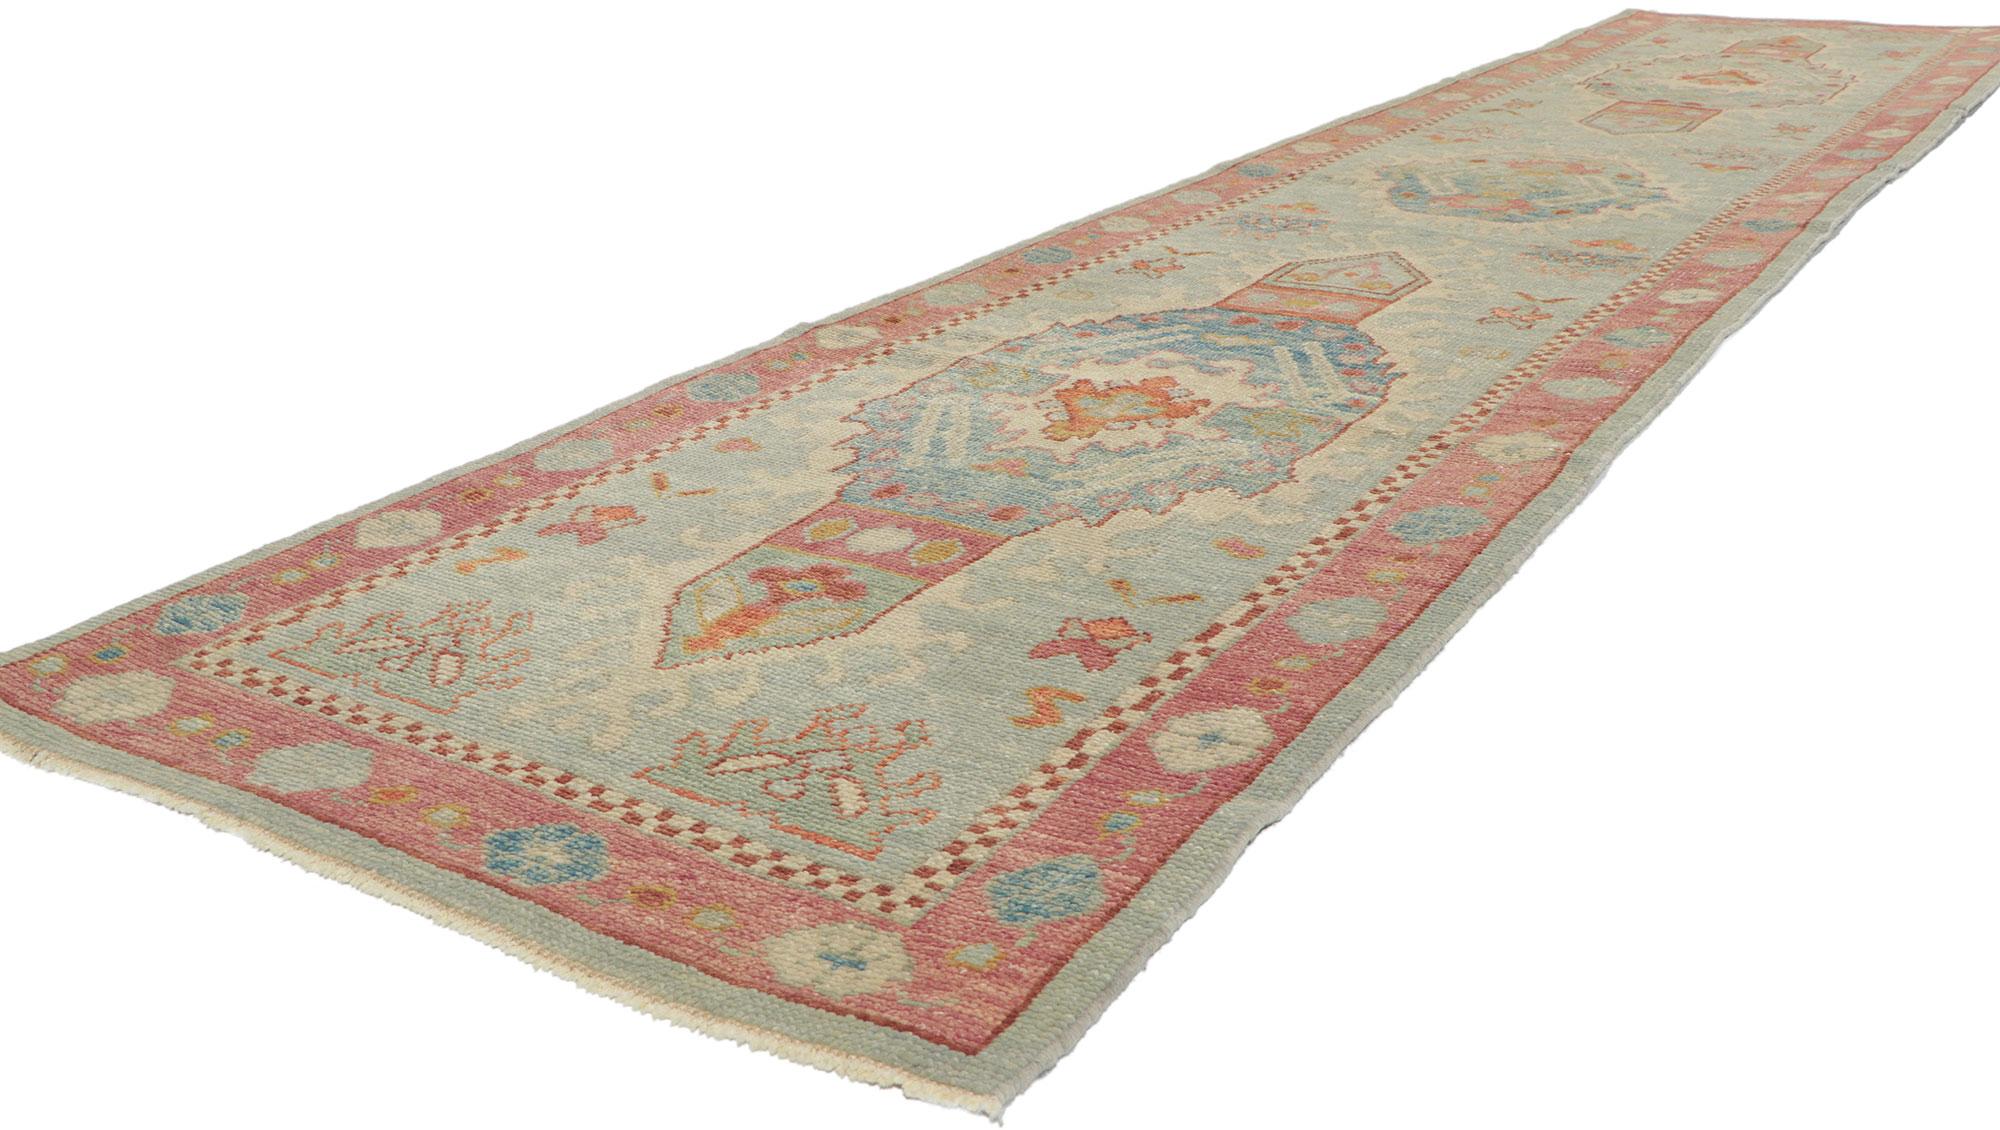 53810 new Turkish Oushak Runner with Hacienda Boho style, 02'11 x 13'09. With its expressive tribal design, incredible detail and texture, this hand-knotted wool contemporary Turkish Oushak runner is a captivating vision of woven beauty. The